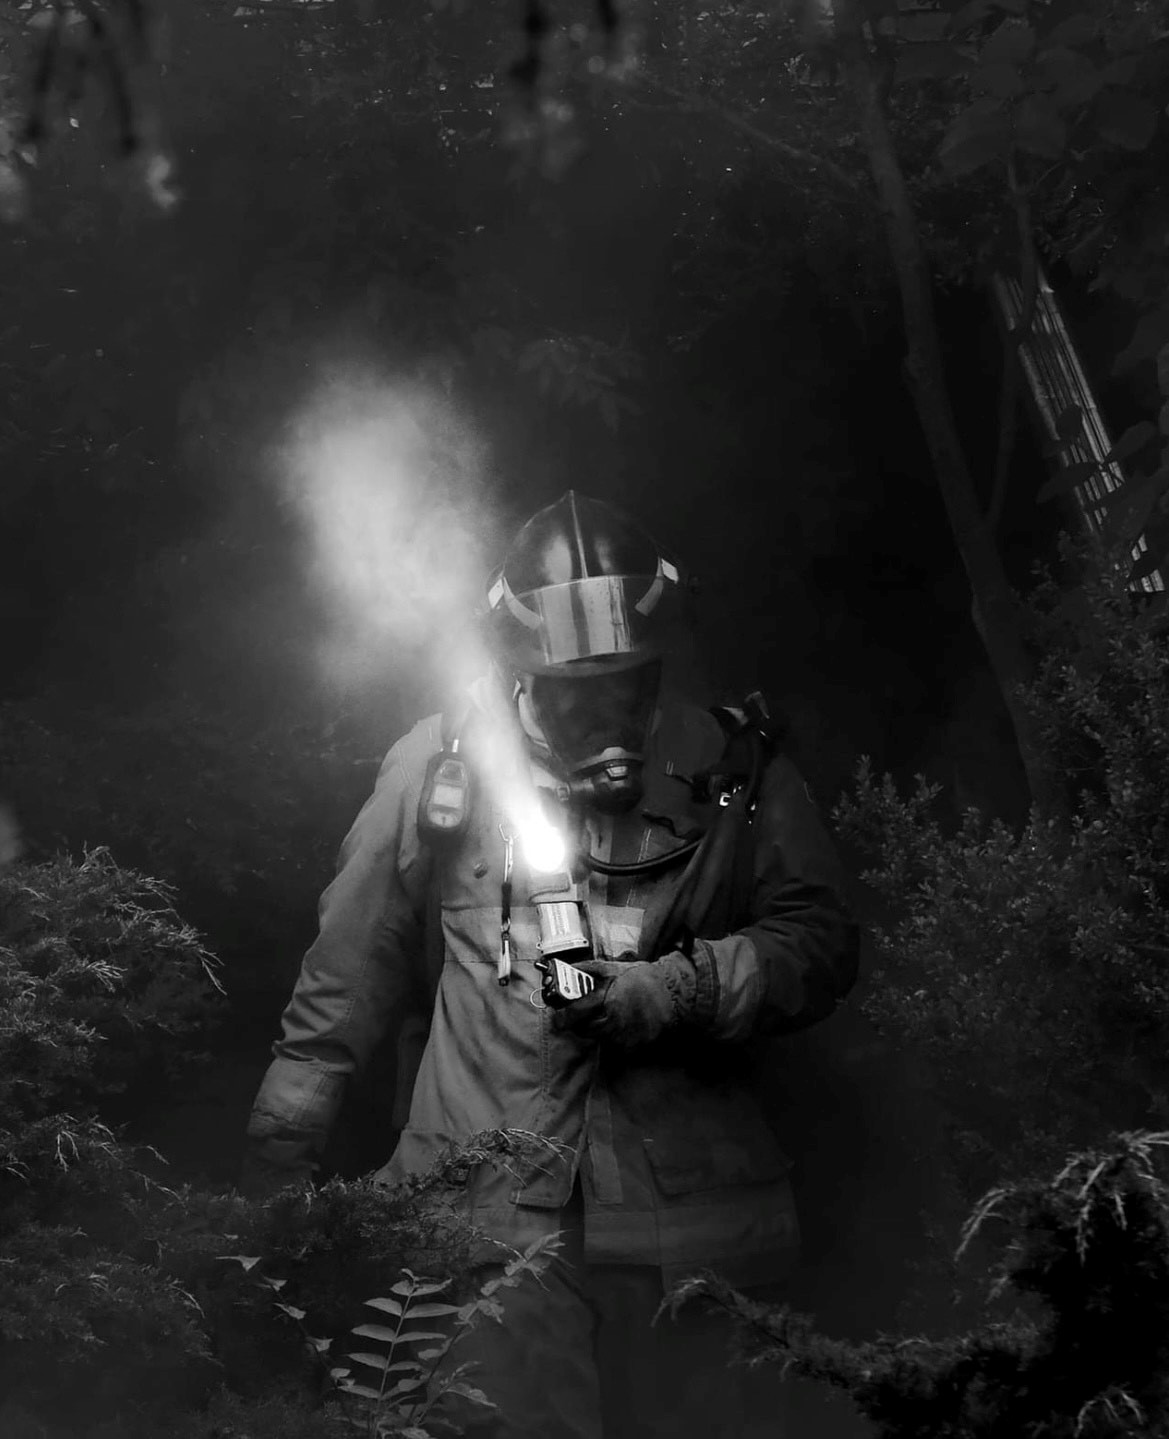 A firefighter on scene of an emergency, surrounded by plants.